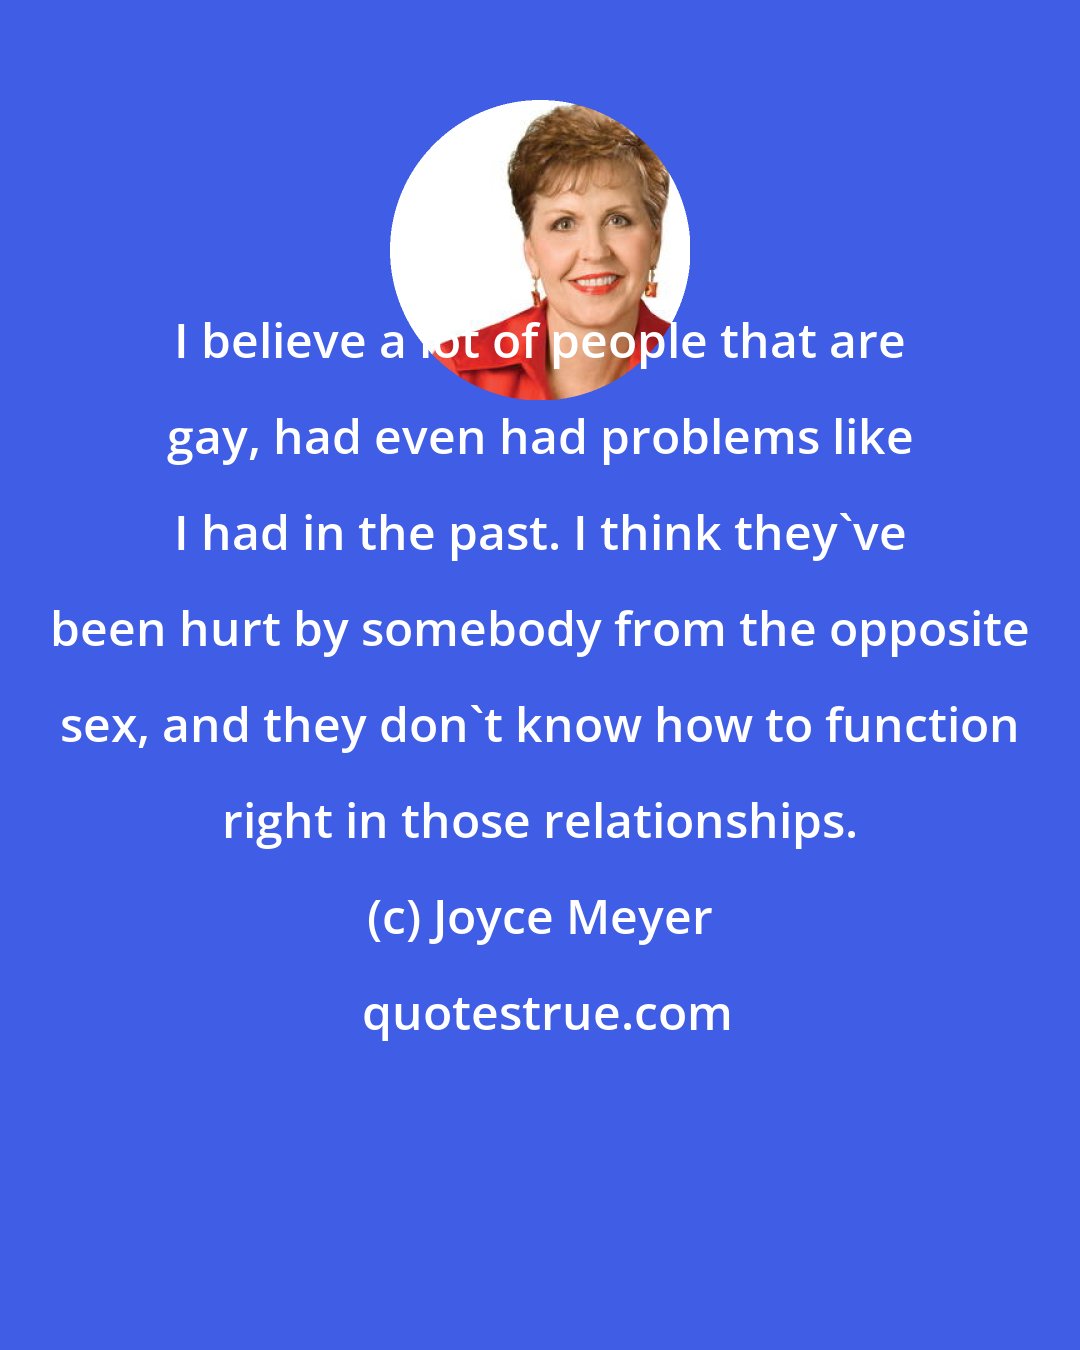 Joyce Meyer: I believe a lot of people that are gay, had even had problems like I had in the past. I think they've been hurt by somebody from the opposite sex, and they don't know how to function right in those relationships.